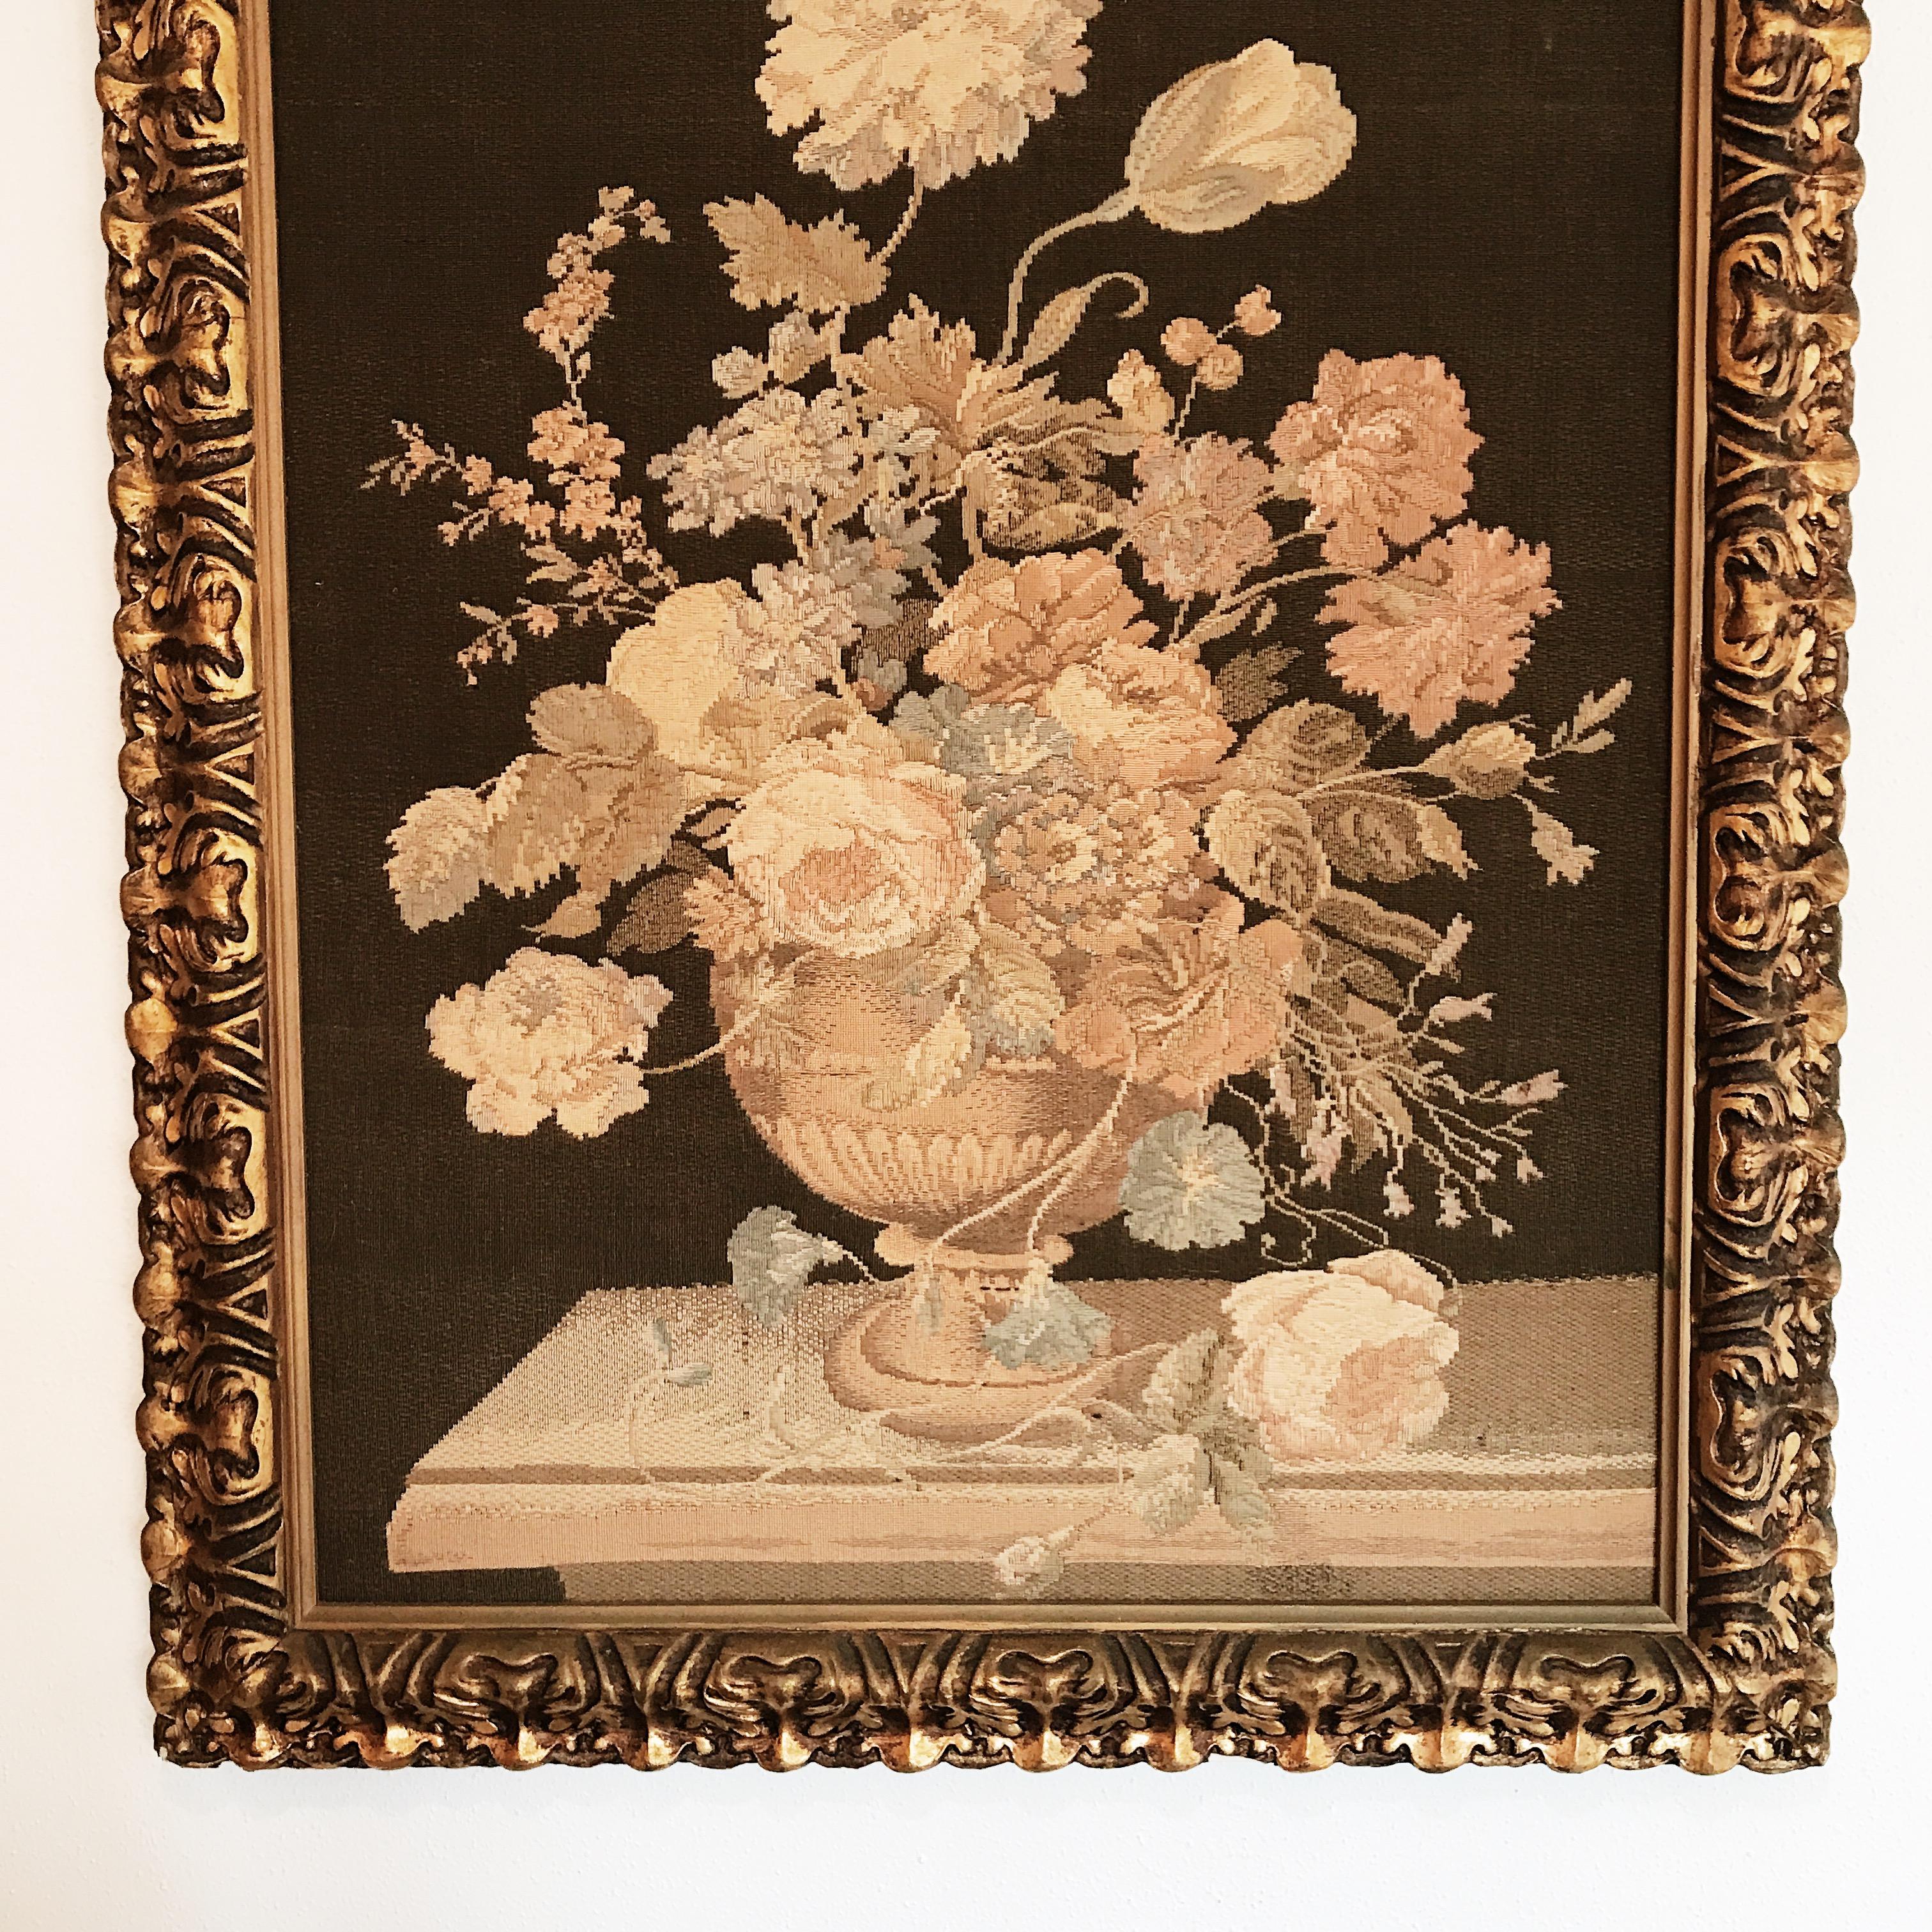 Early machine loom Italian floral still life tapestry in decorative mid-20th century Italian giltwood frame.
 